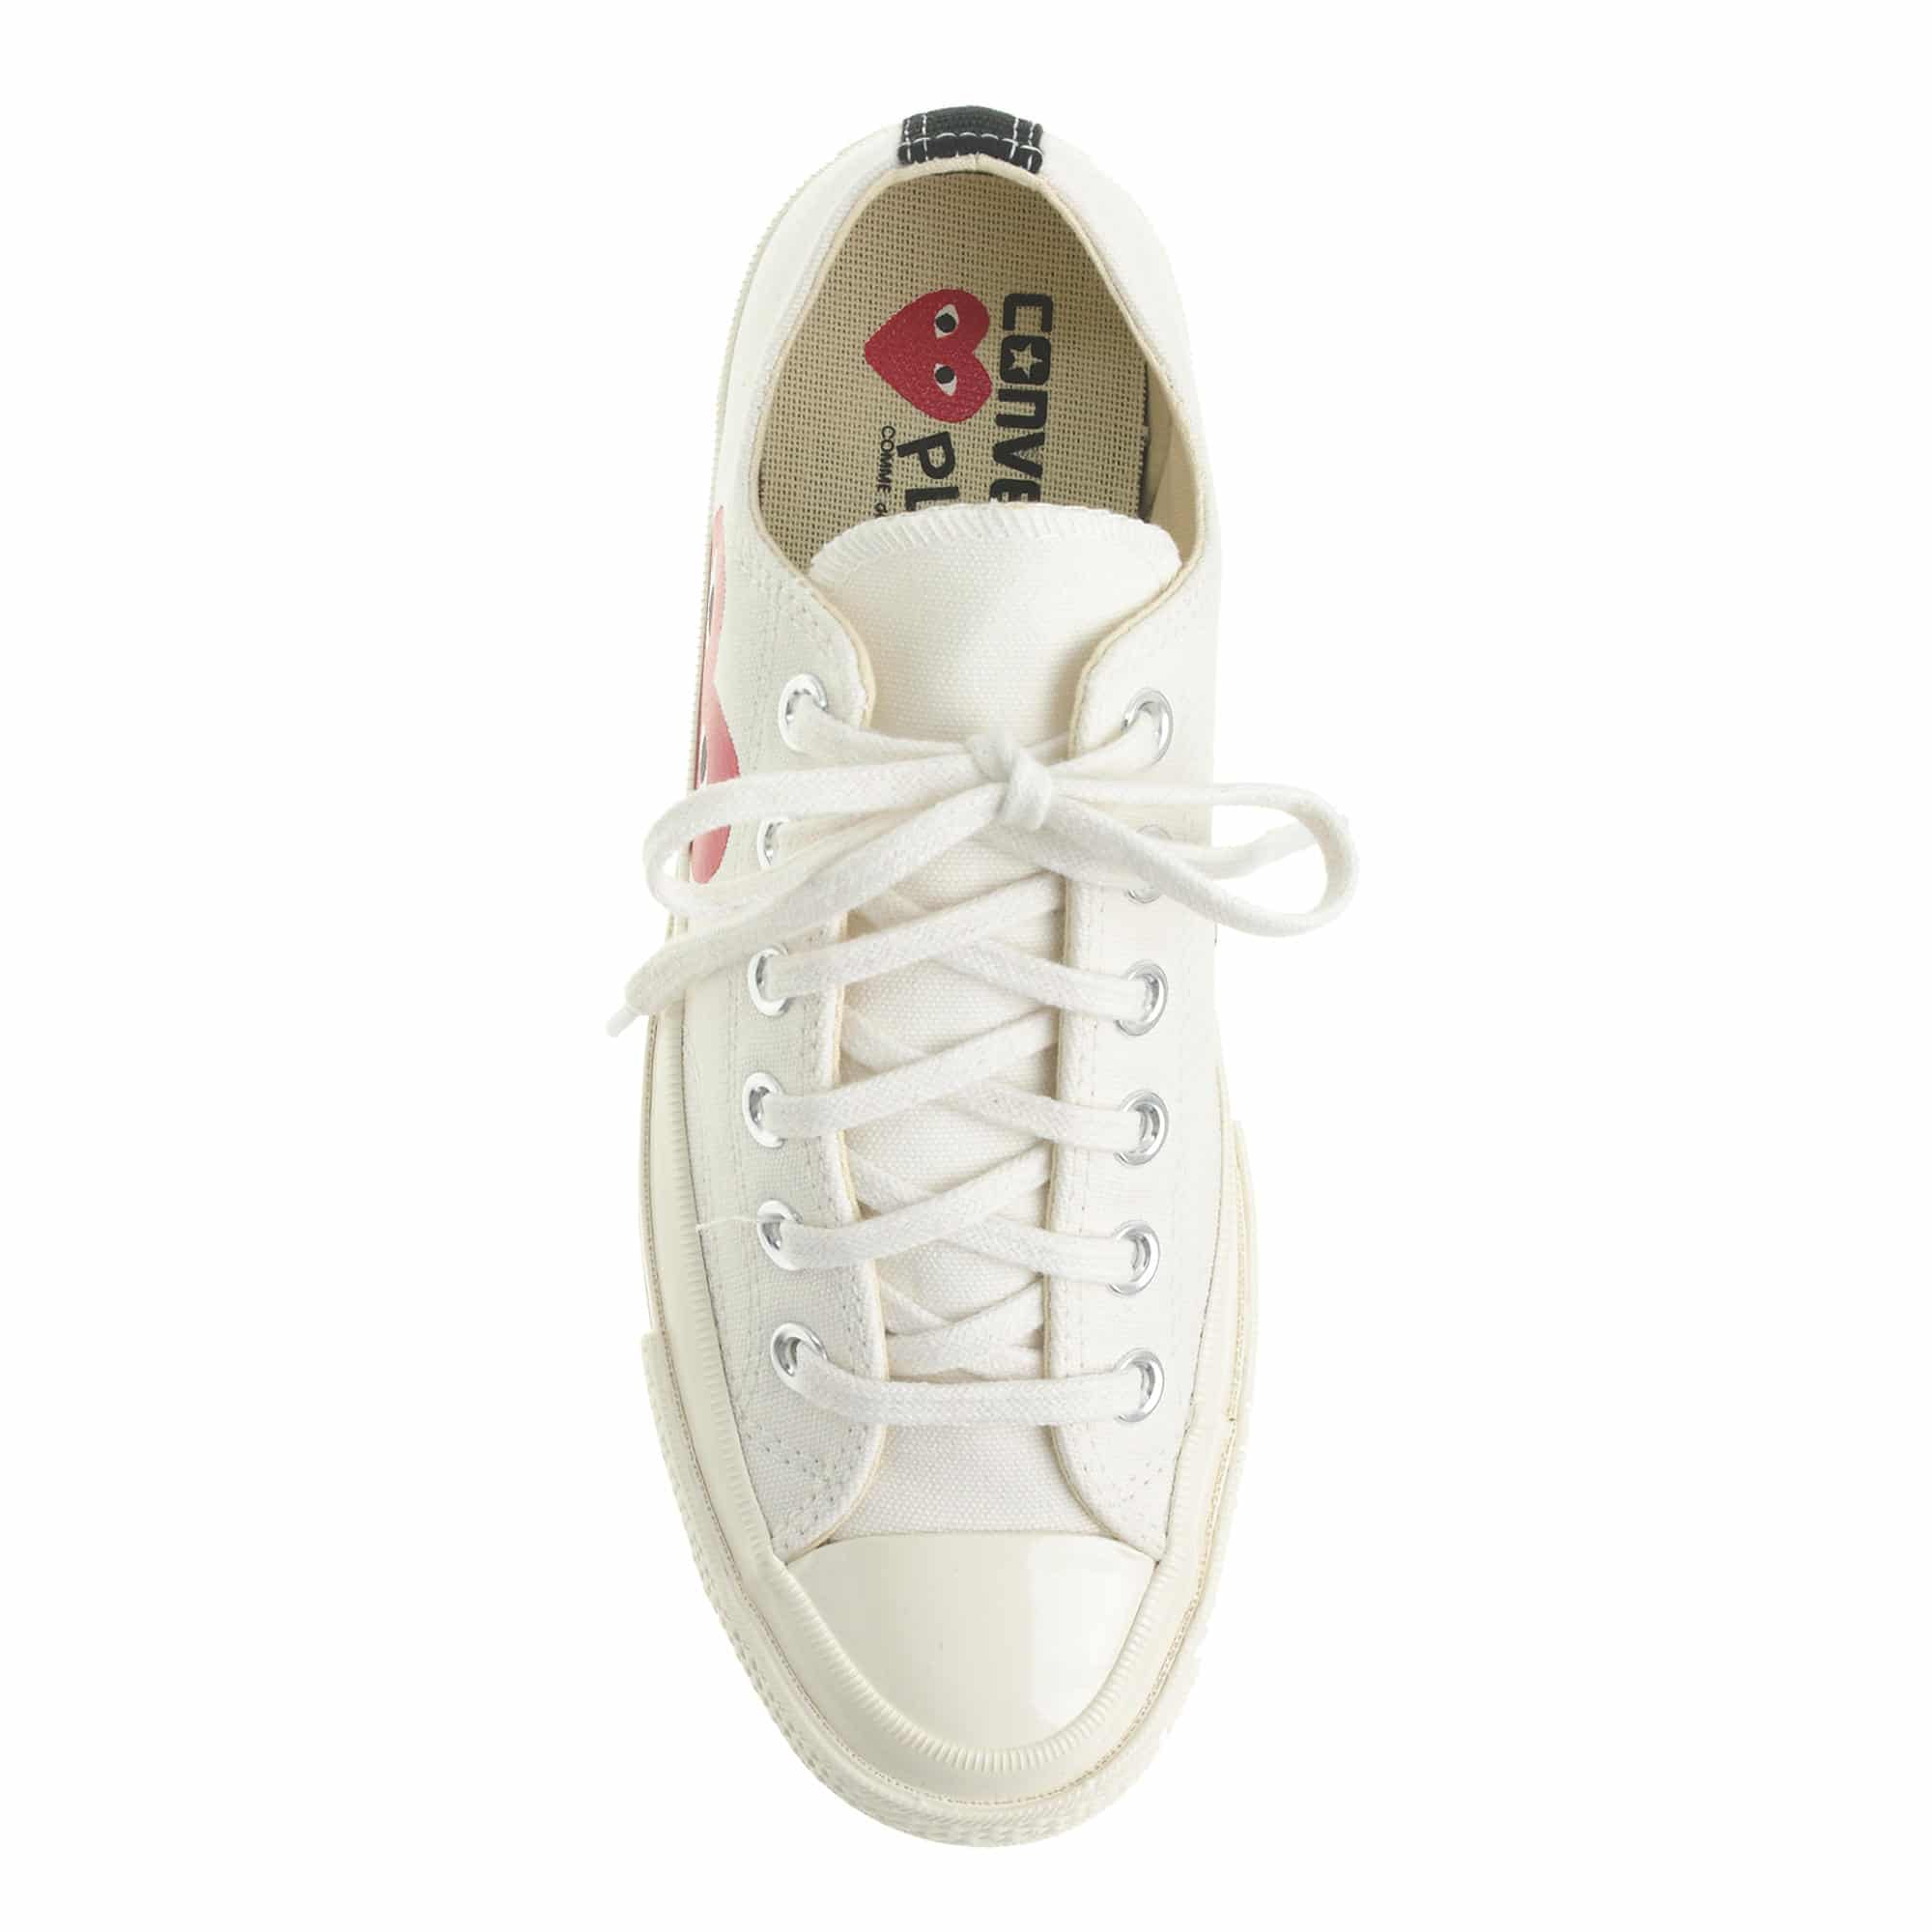 the fashion magpie comme des garcons converse sneakers